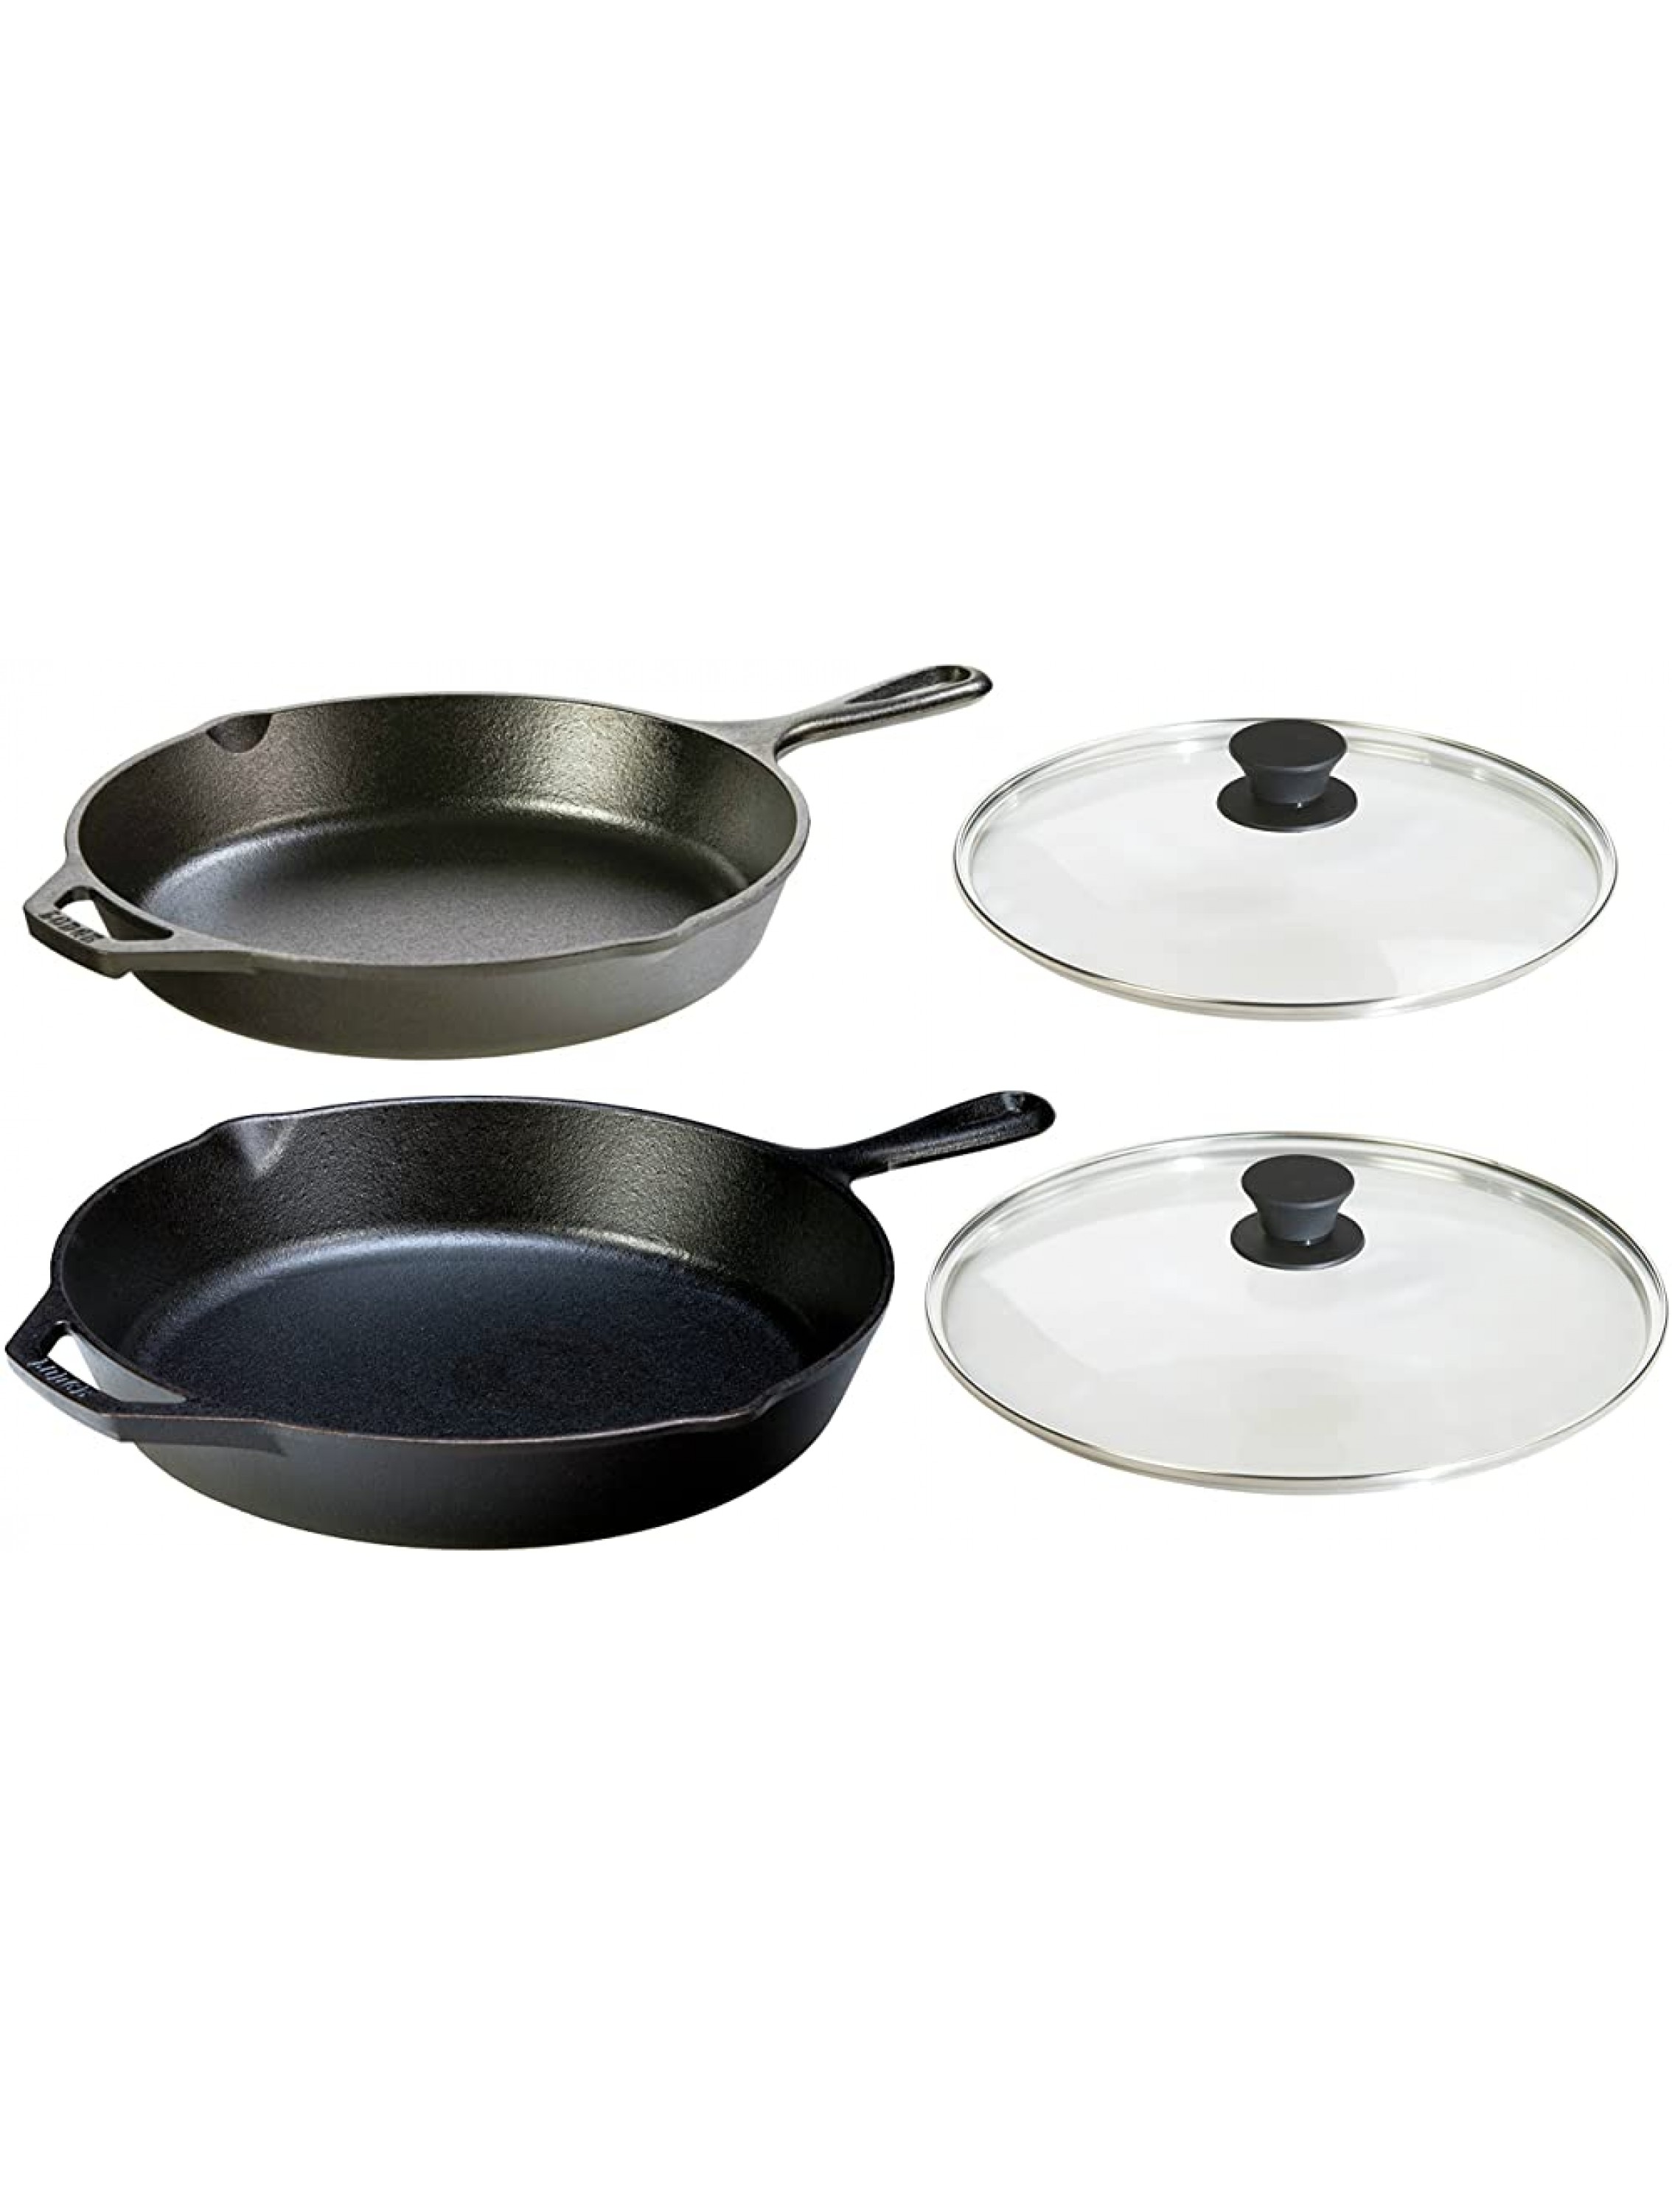 Lodge Seasoned Cast Iron 4 Piece Bundle. Two Sets of Cast Iron Skillets with Tempered Glass Lids. 10.25 Inch Set + 12 Inch Set - BK0RWRY4C